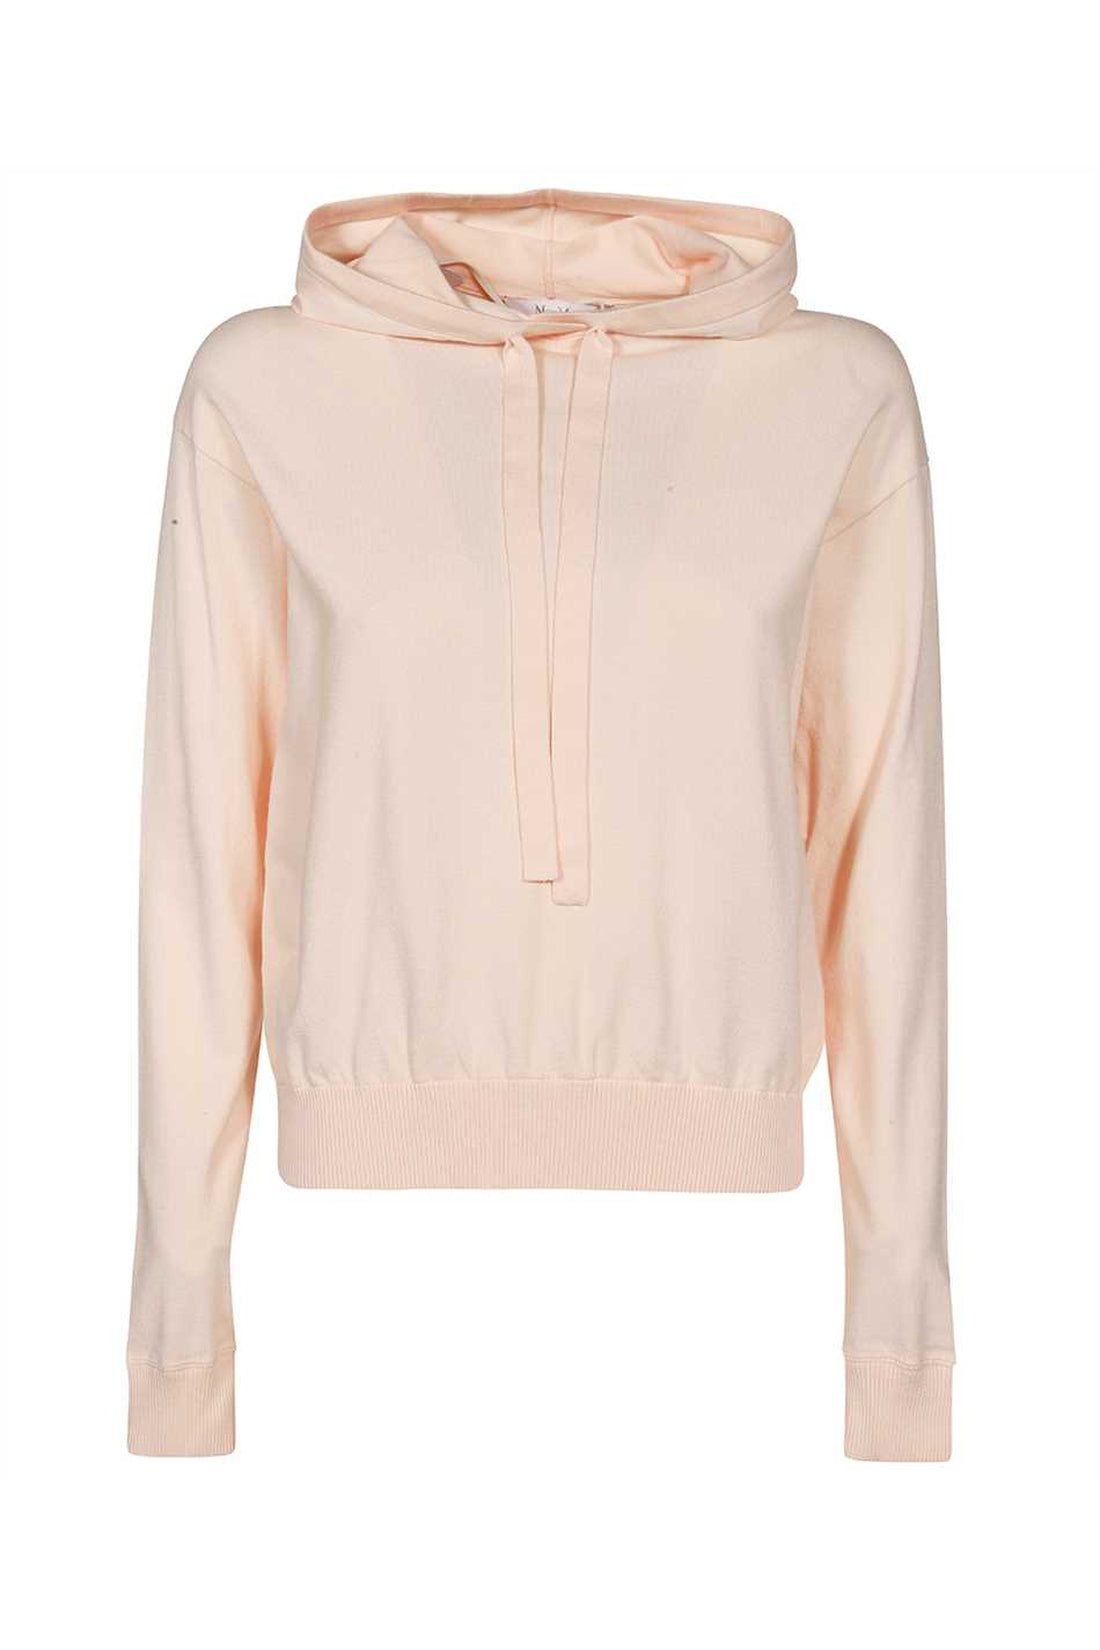 Max Mara-OUTLET-SALE-Classe hooded sweater-ARCHIVIST